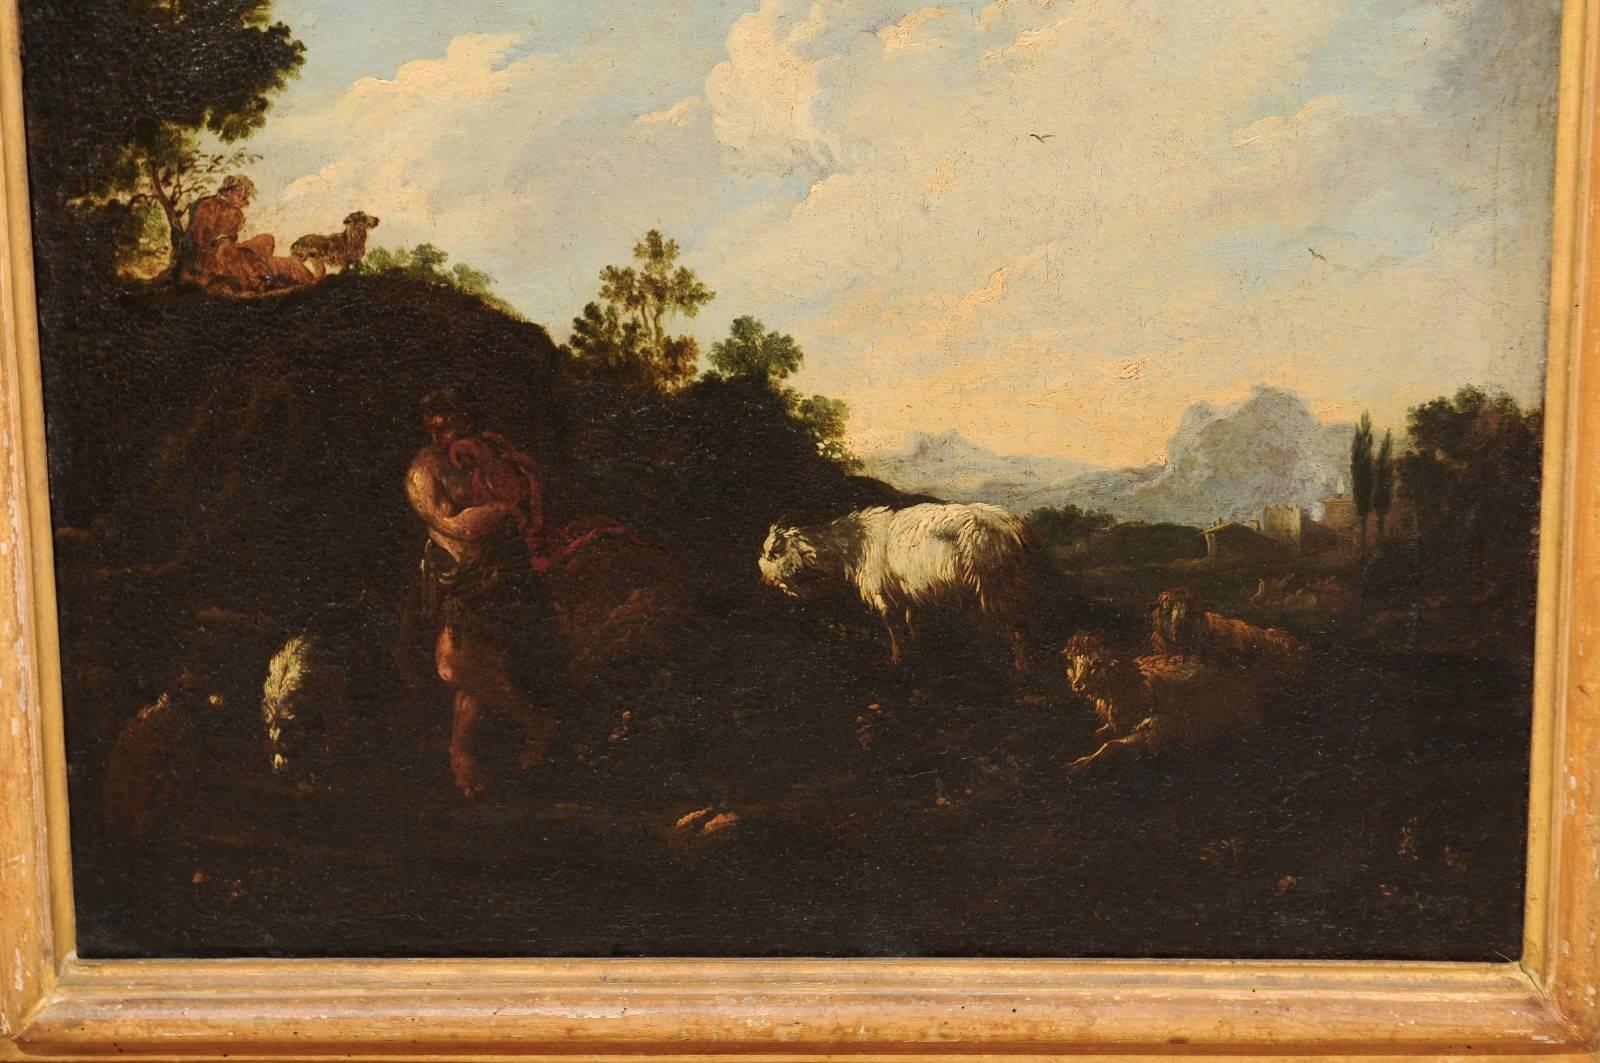 Hand-Painted Pair of 18th Century Italian Oil on Canvas Landscape Painting